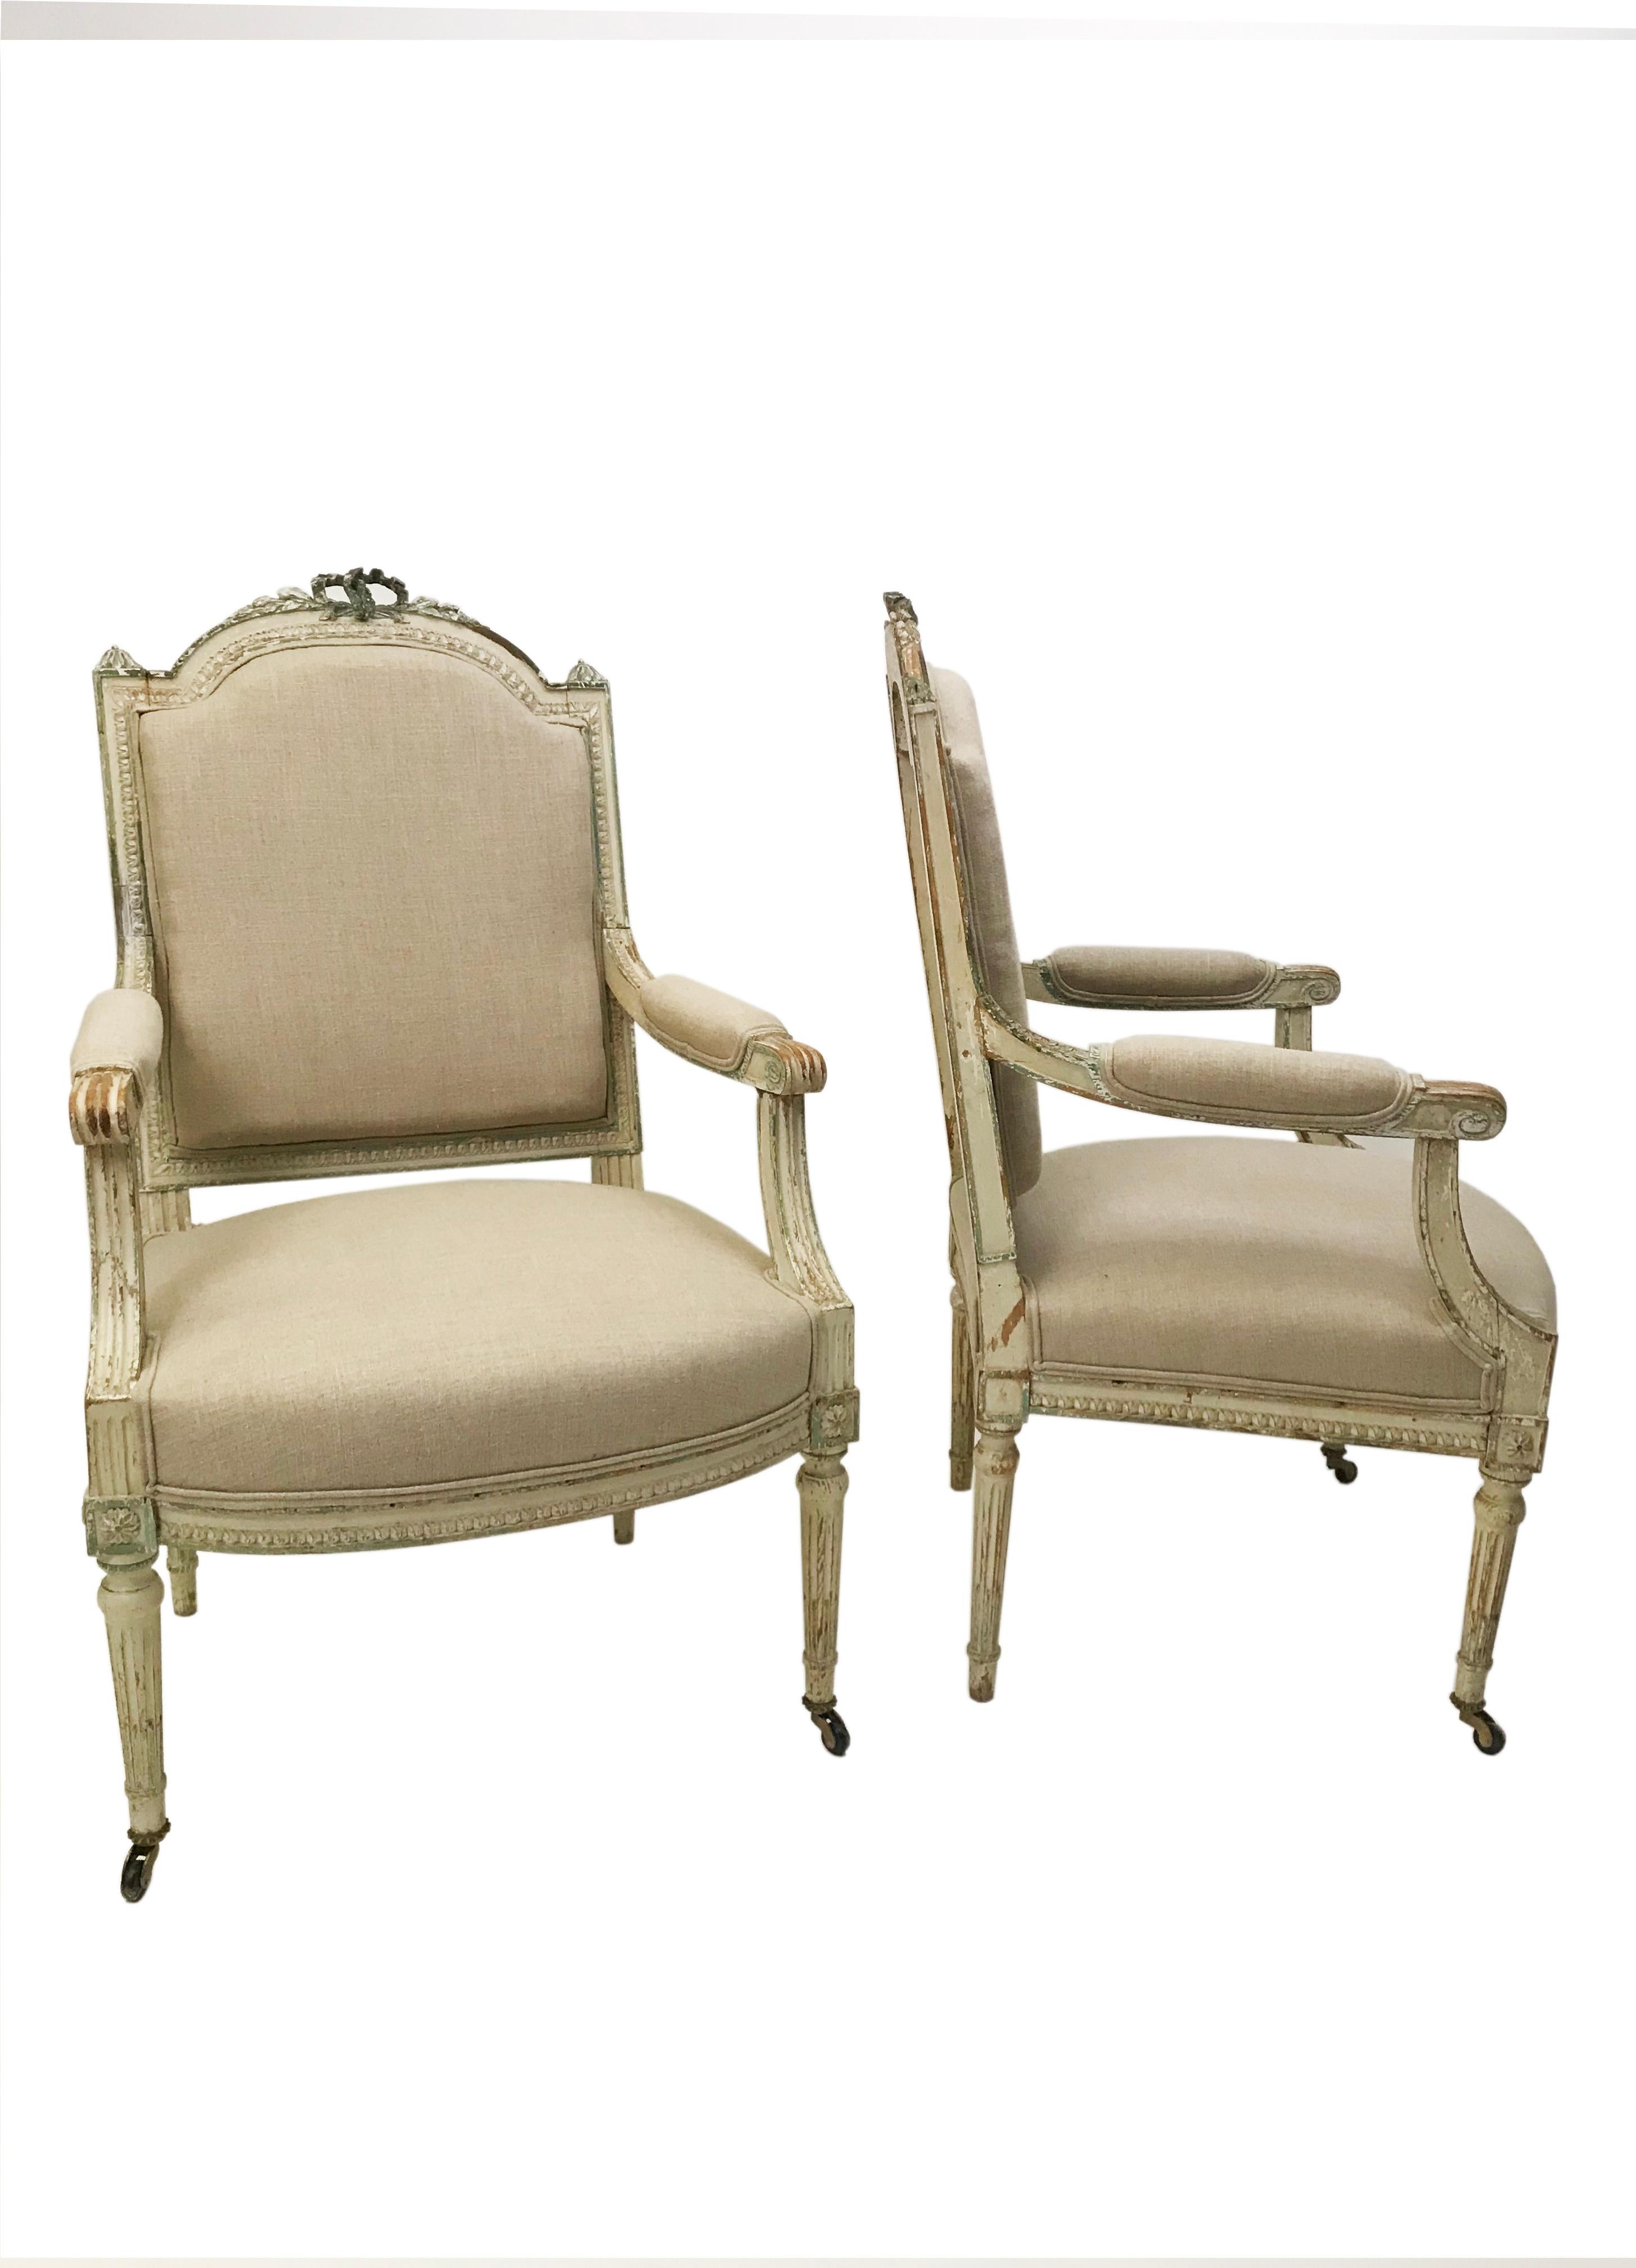 Pair of French painted fauteils armchairs, 19th century. Hand carved in the classical style and hand painted with original finish in soft cream and green. Frames are walnut, in the style of Louis XVI. Decorative Ribbon carved crest. Upholstered in a